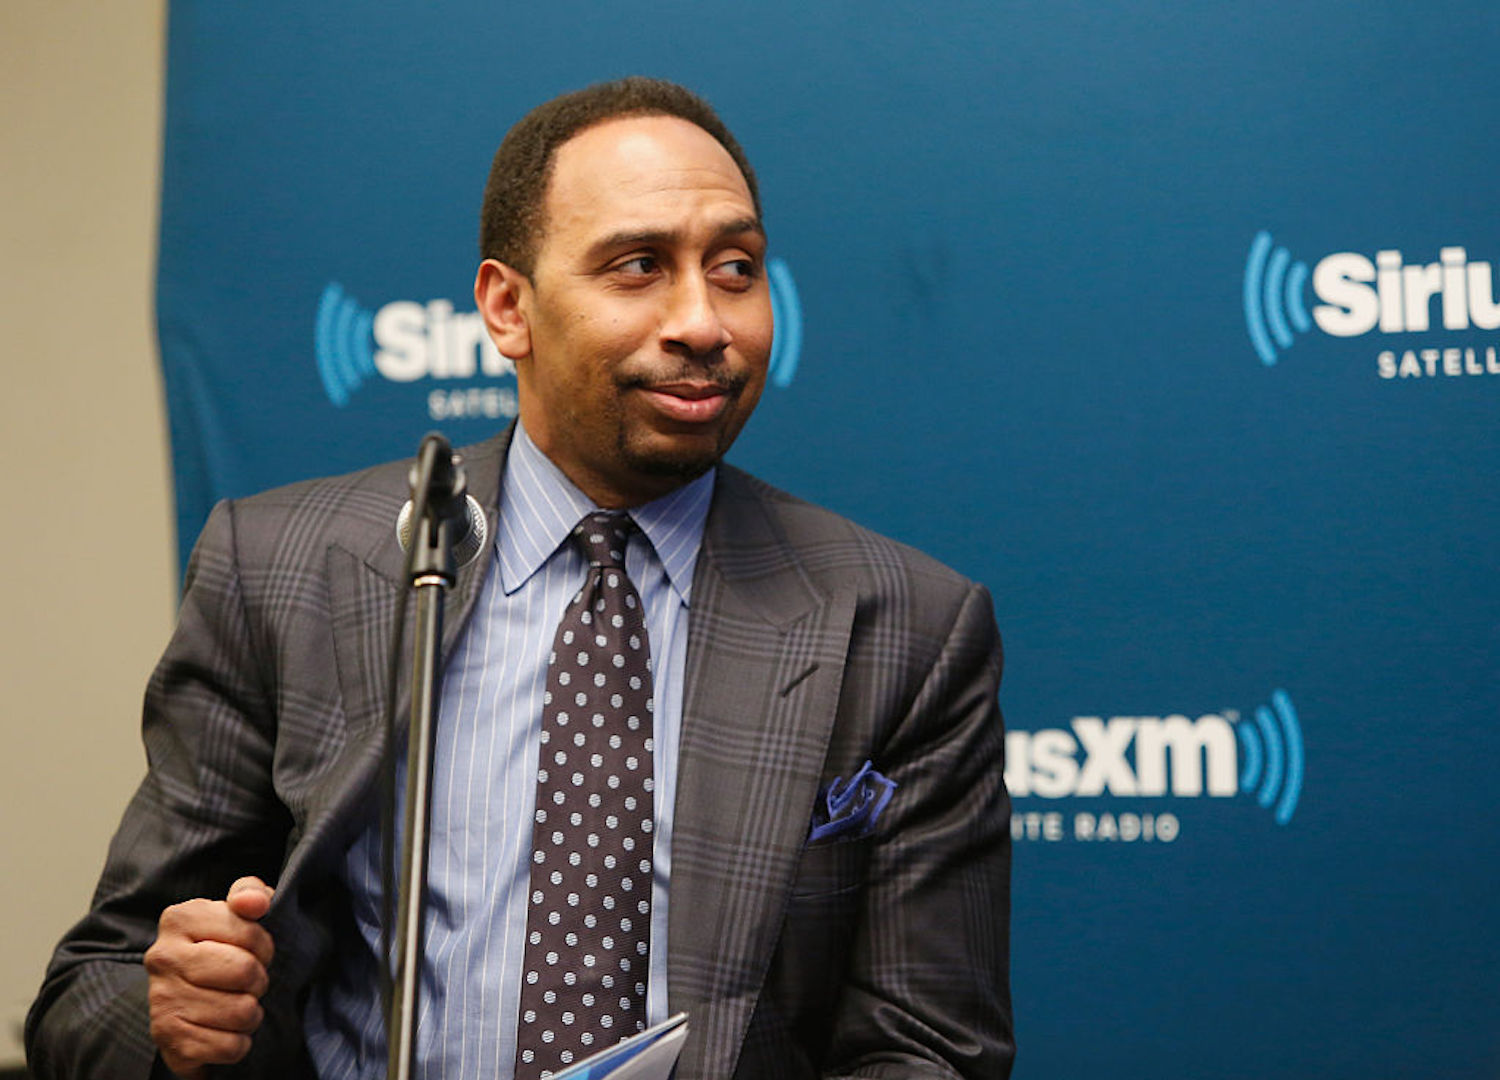 Stephen A. Smith isn't scared of anyone in a debate. He's so confident in his craft he believes he could debate his way to the White House.